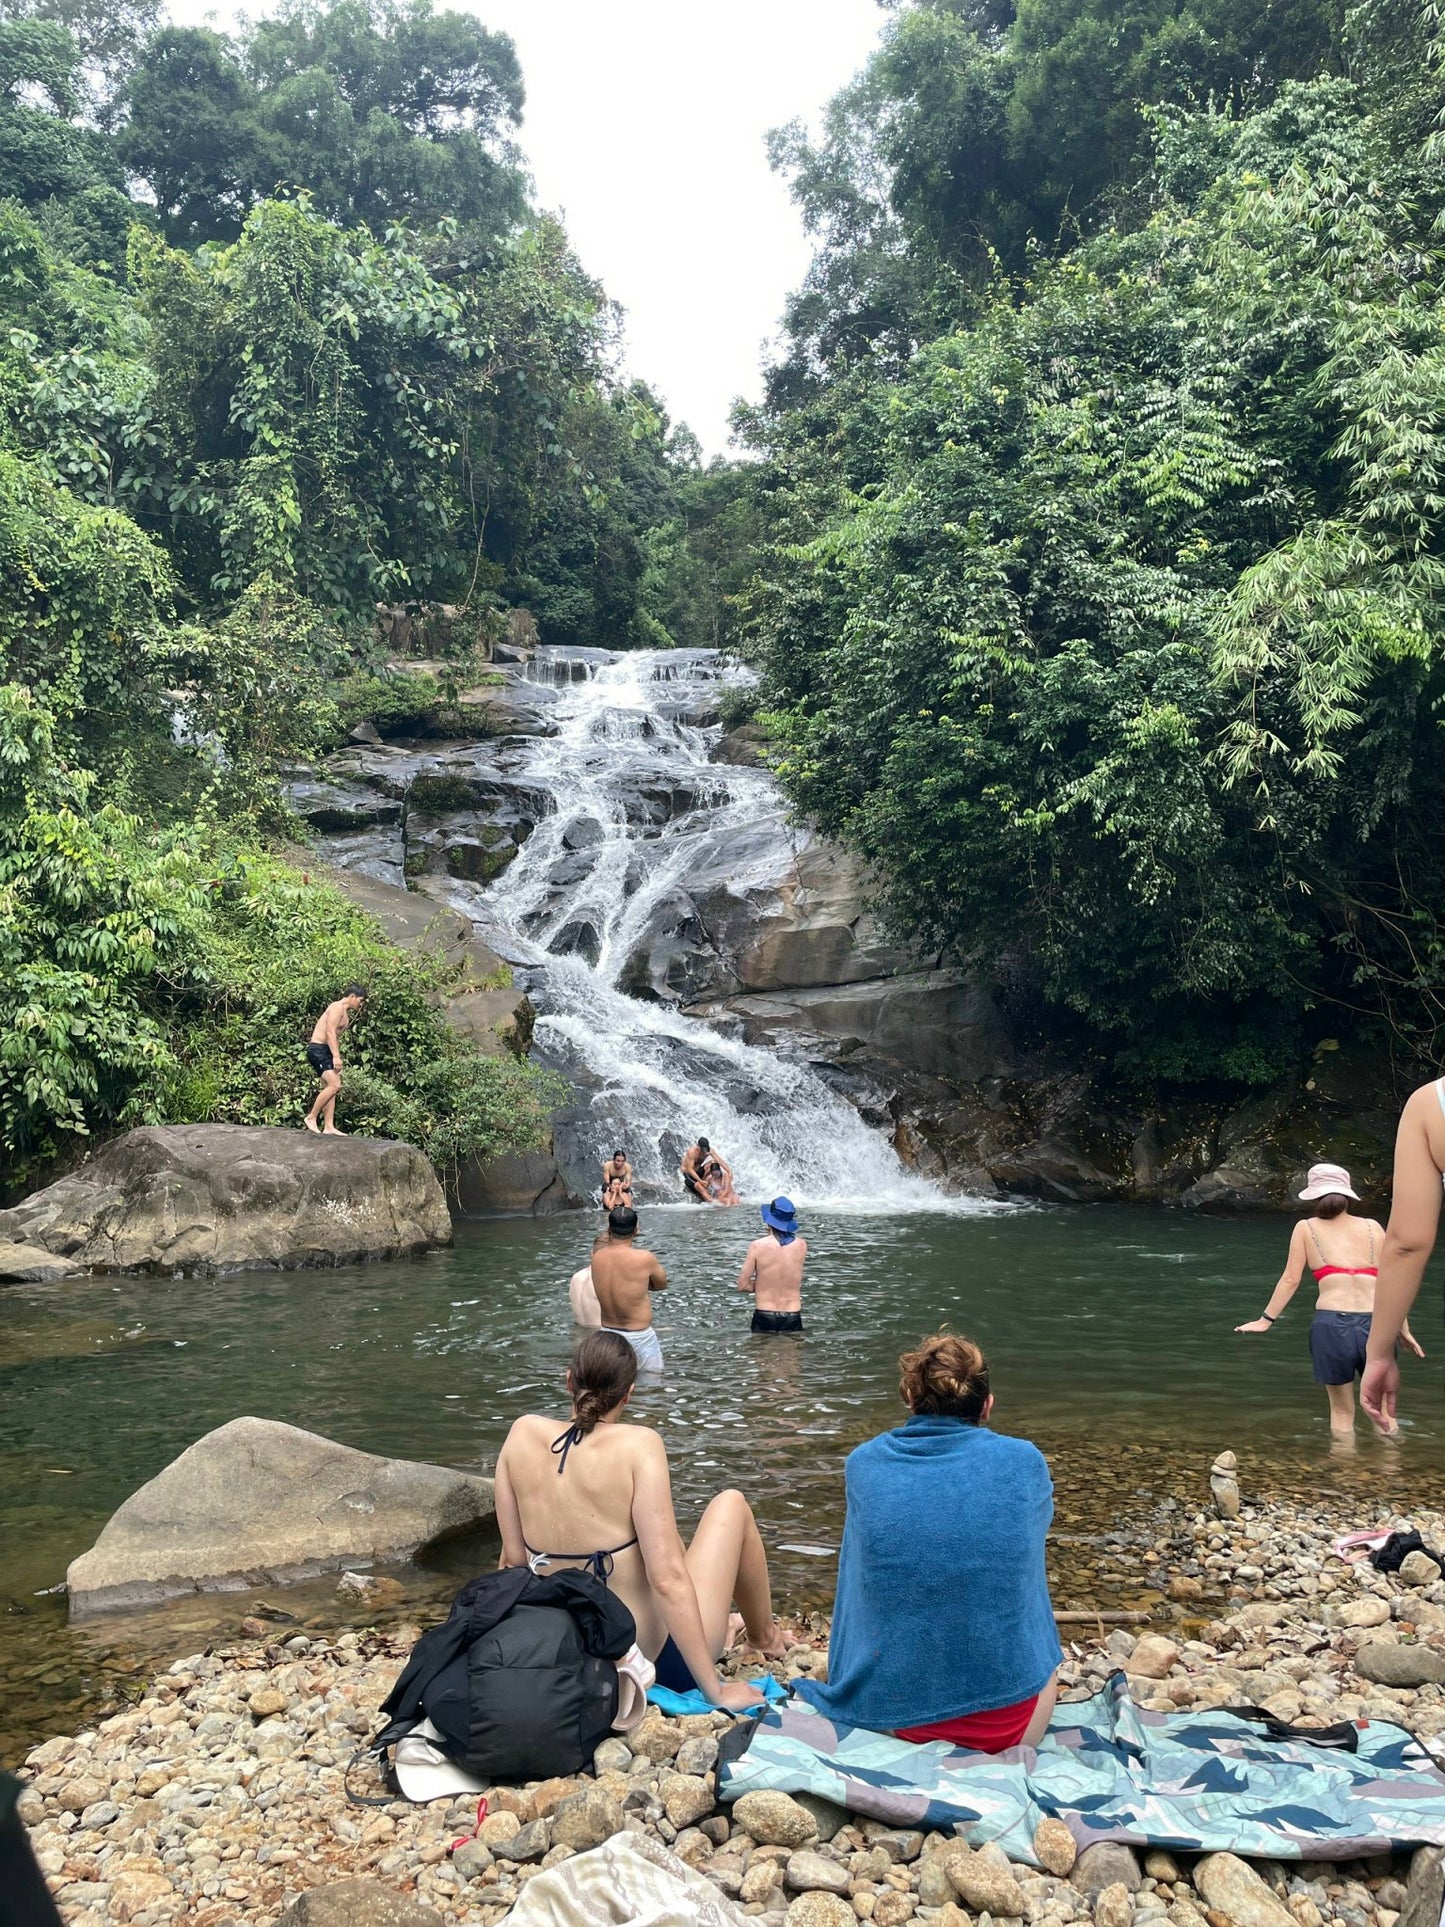 58R: (Private -Full day tour) Buffalo Head Waterfalls, The Hidden Gem In The Deep Forest